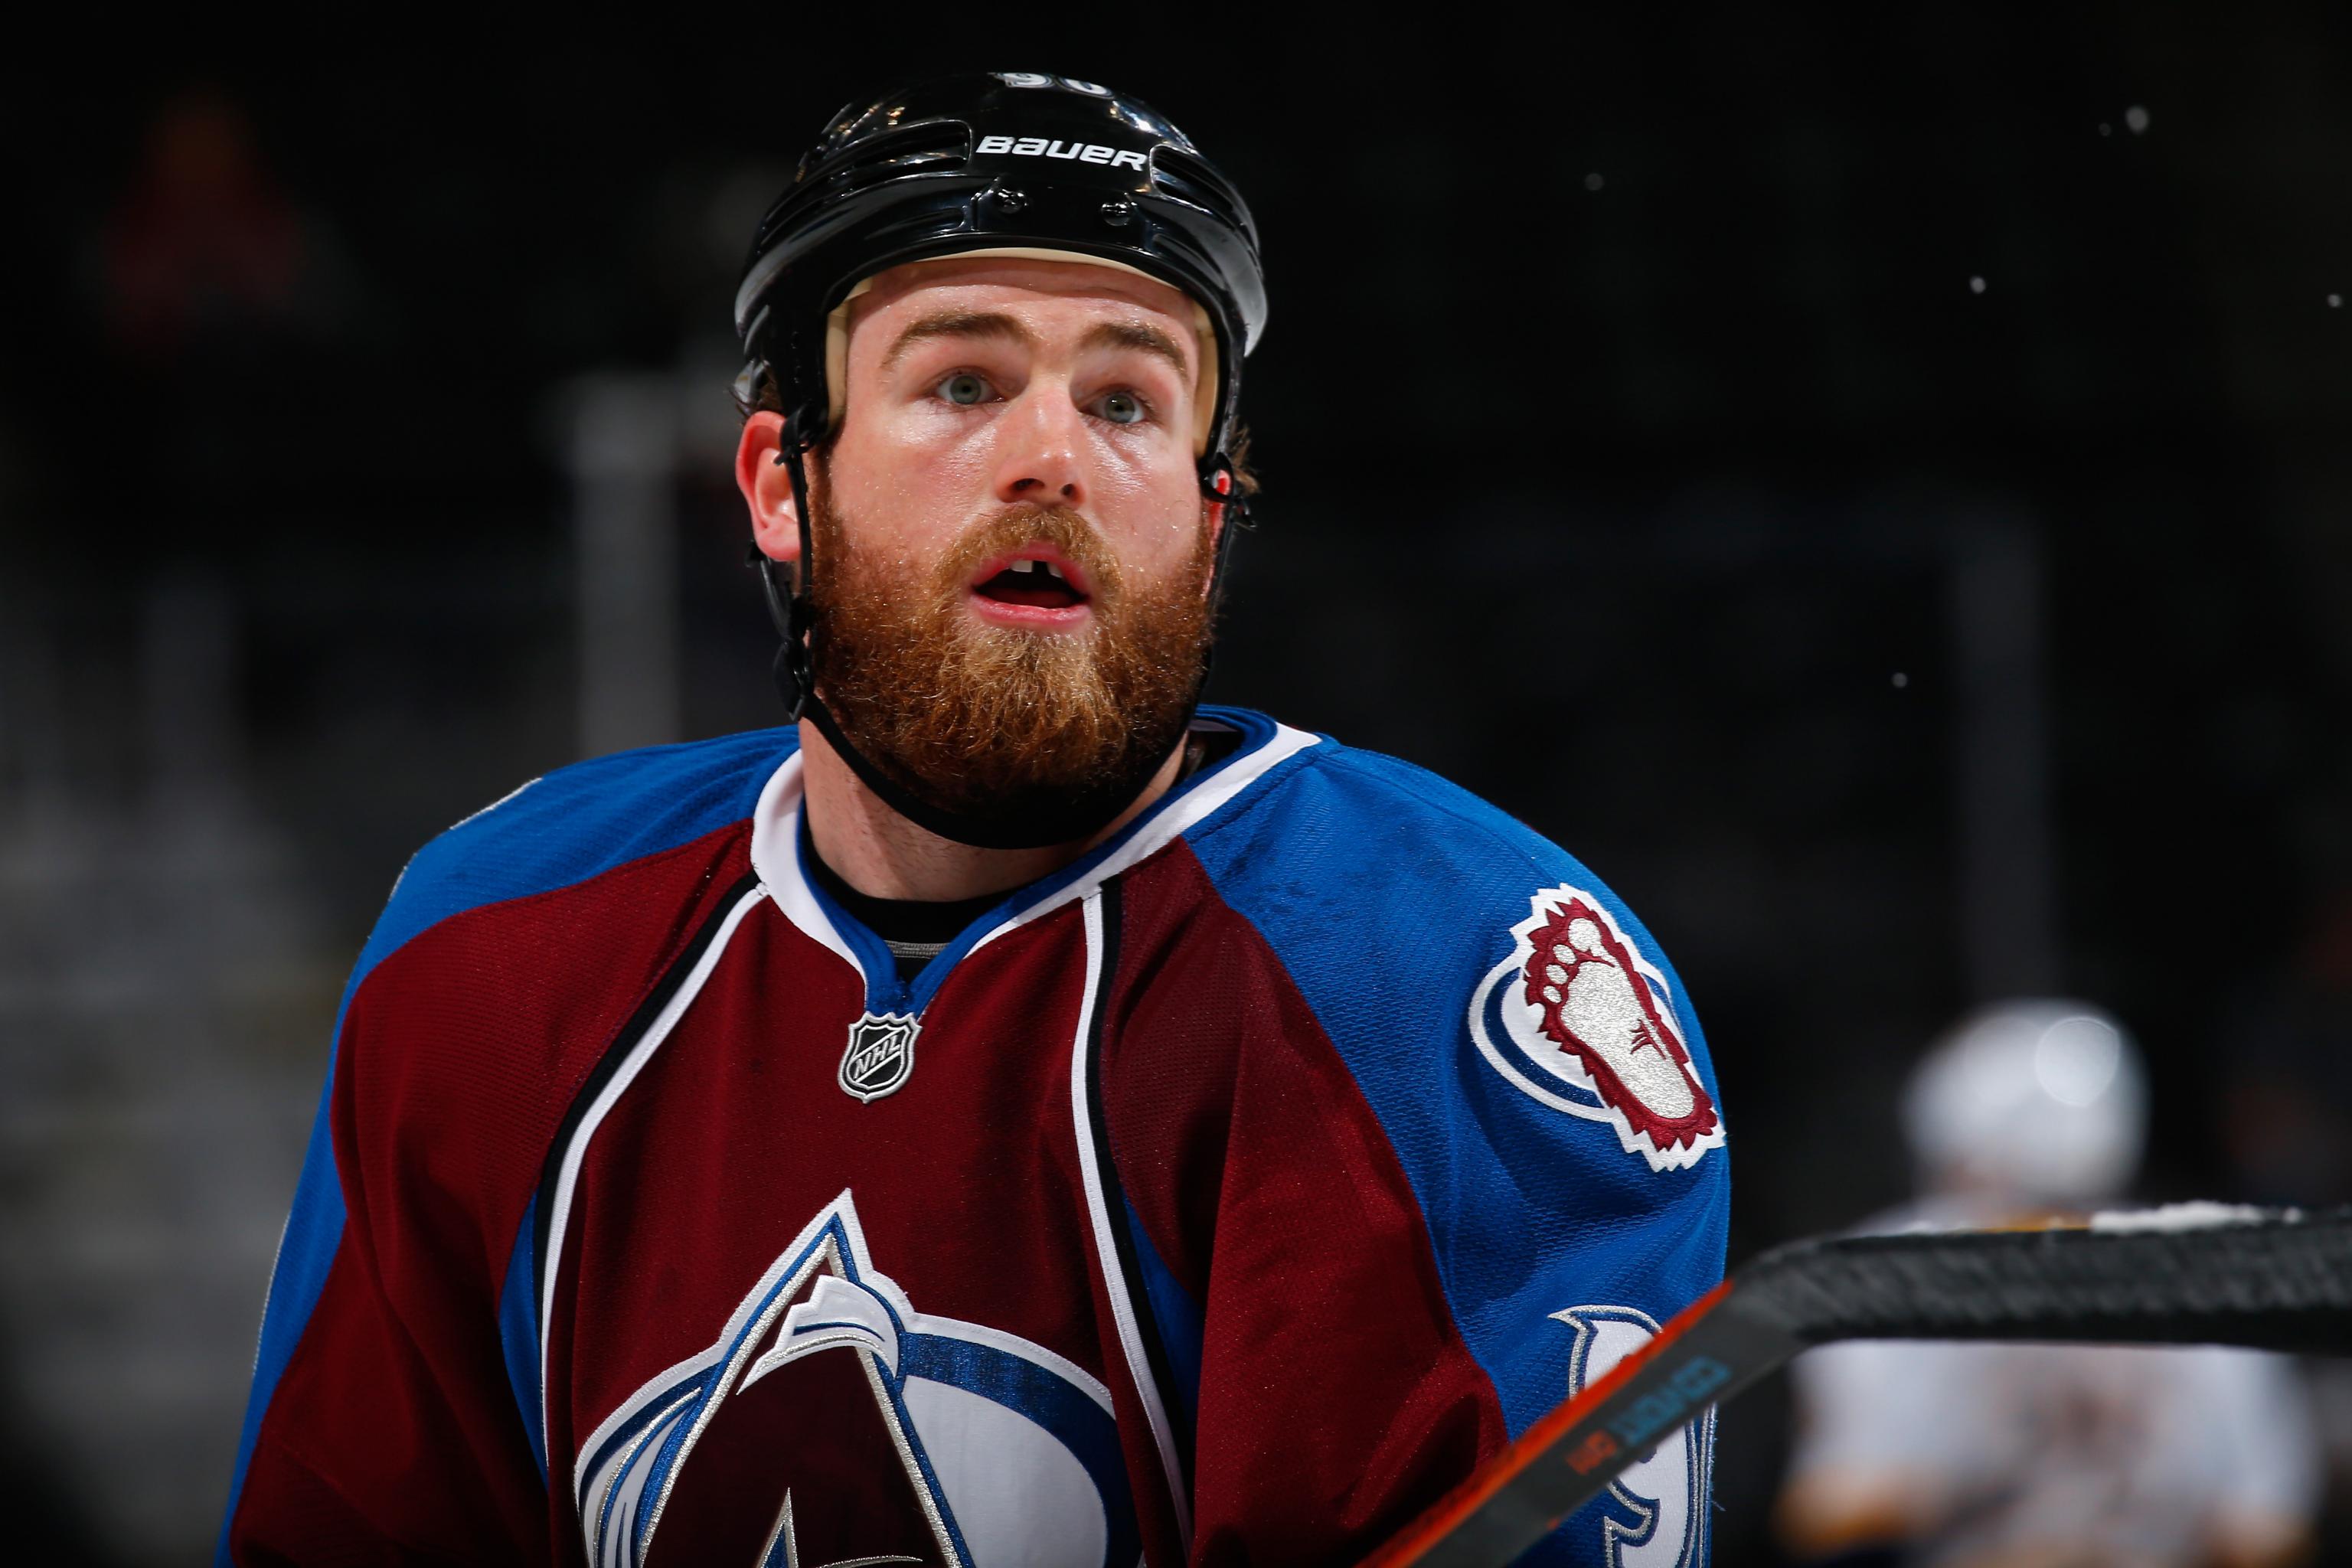 Ryan O'Reilly on His Crazy Stick Blade, Signing Offer Sheets and More!